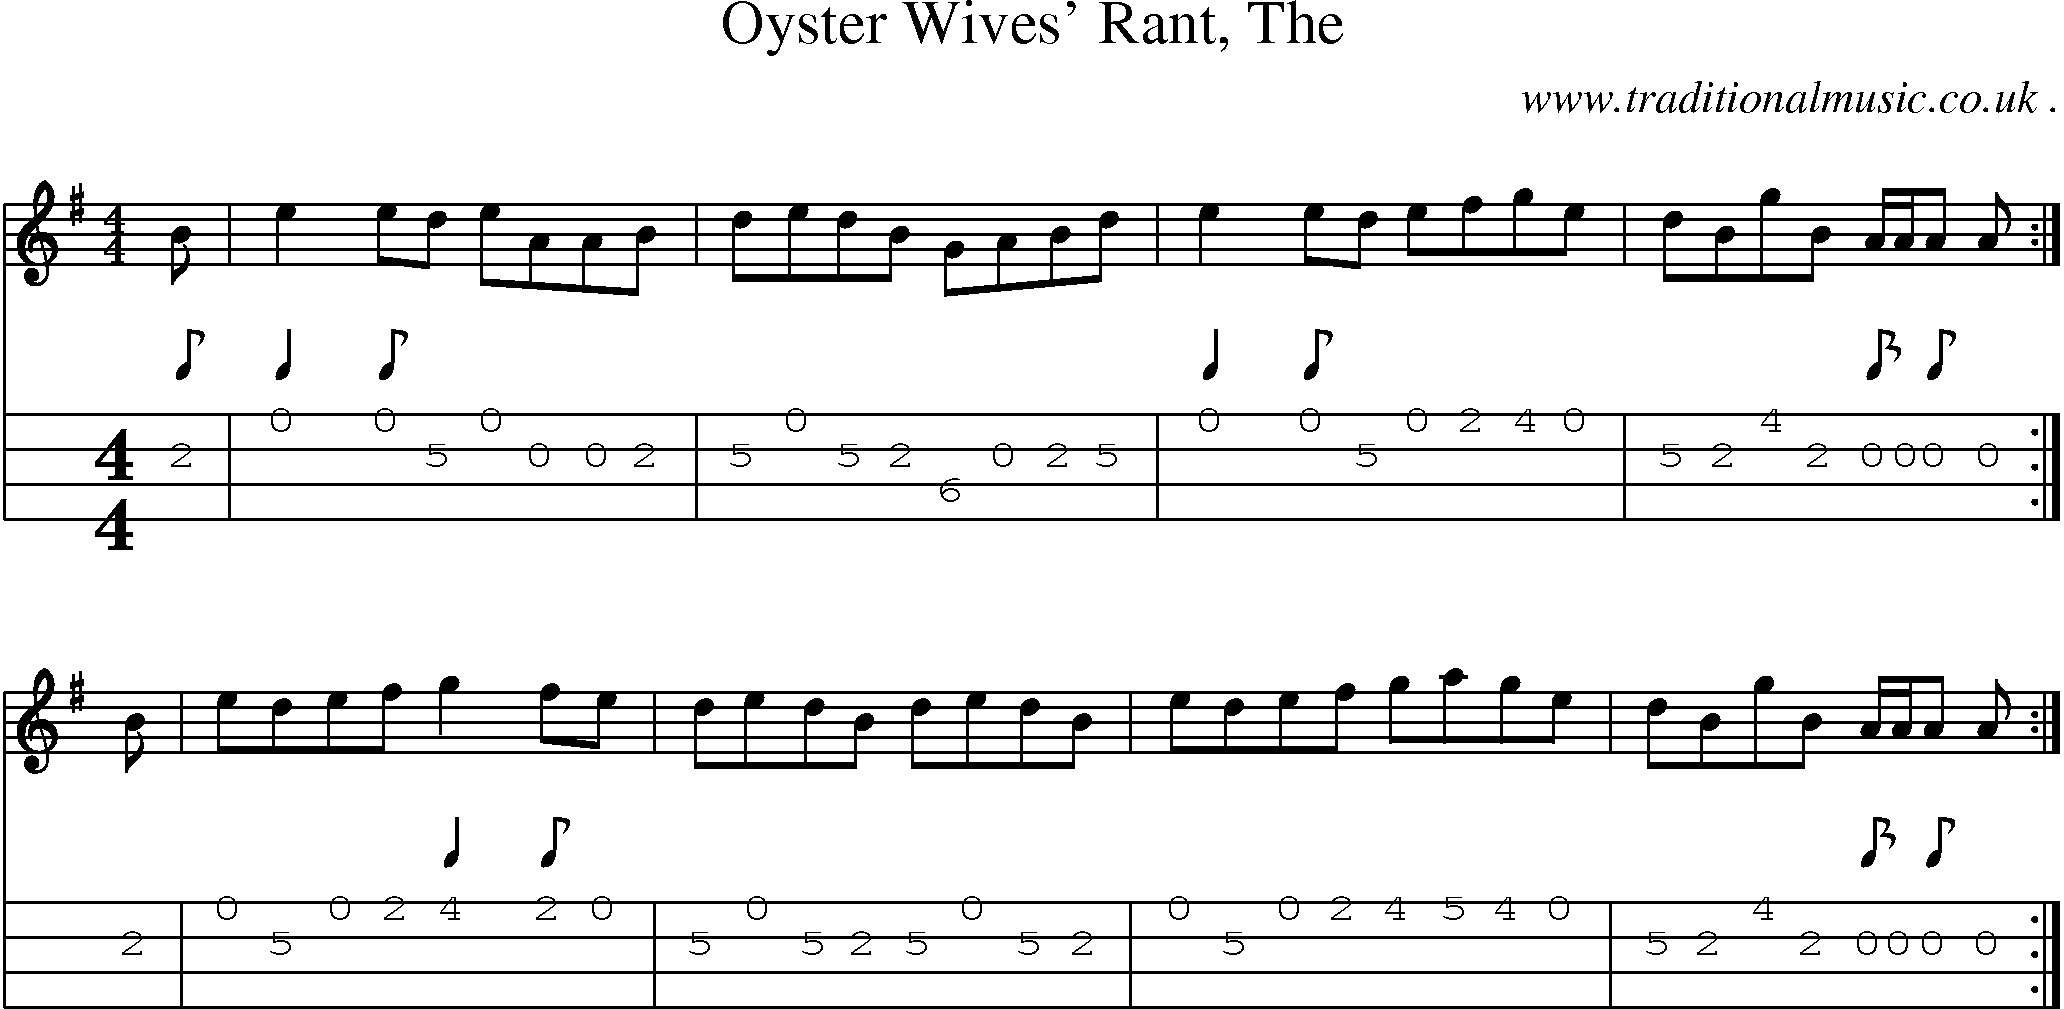 Sheet-music  score, Chords and Mandolin Tabs for Oyster Wives Rant The